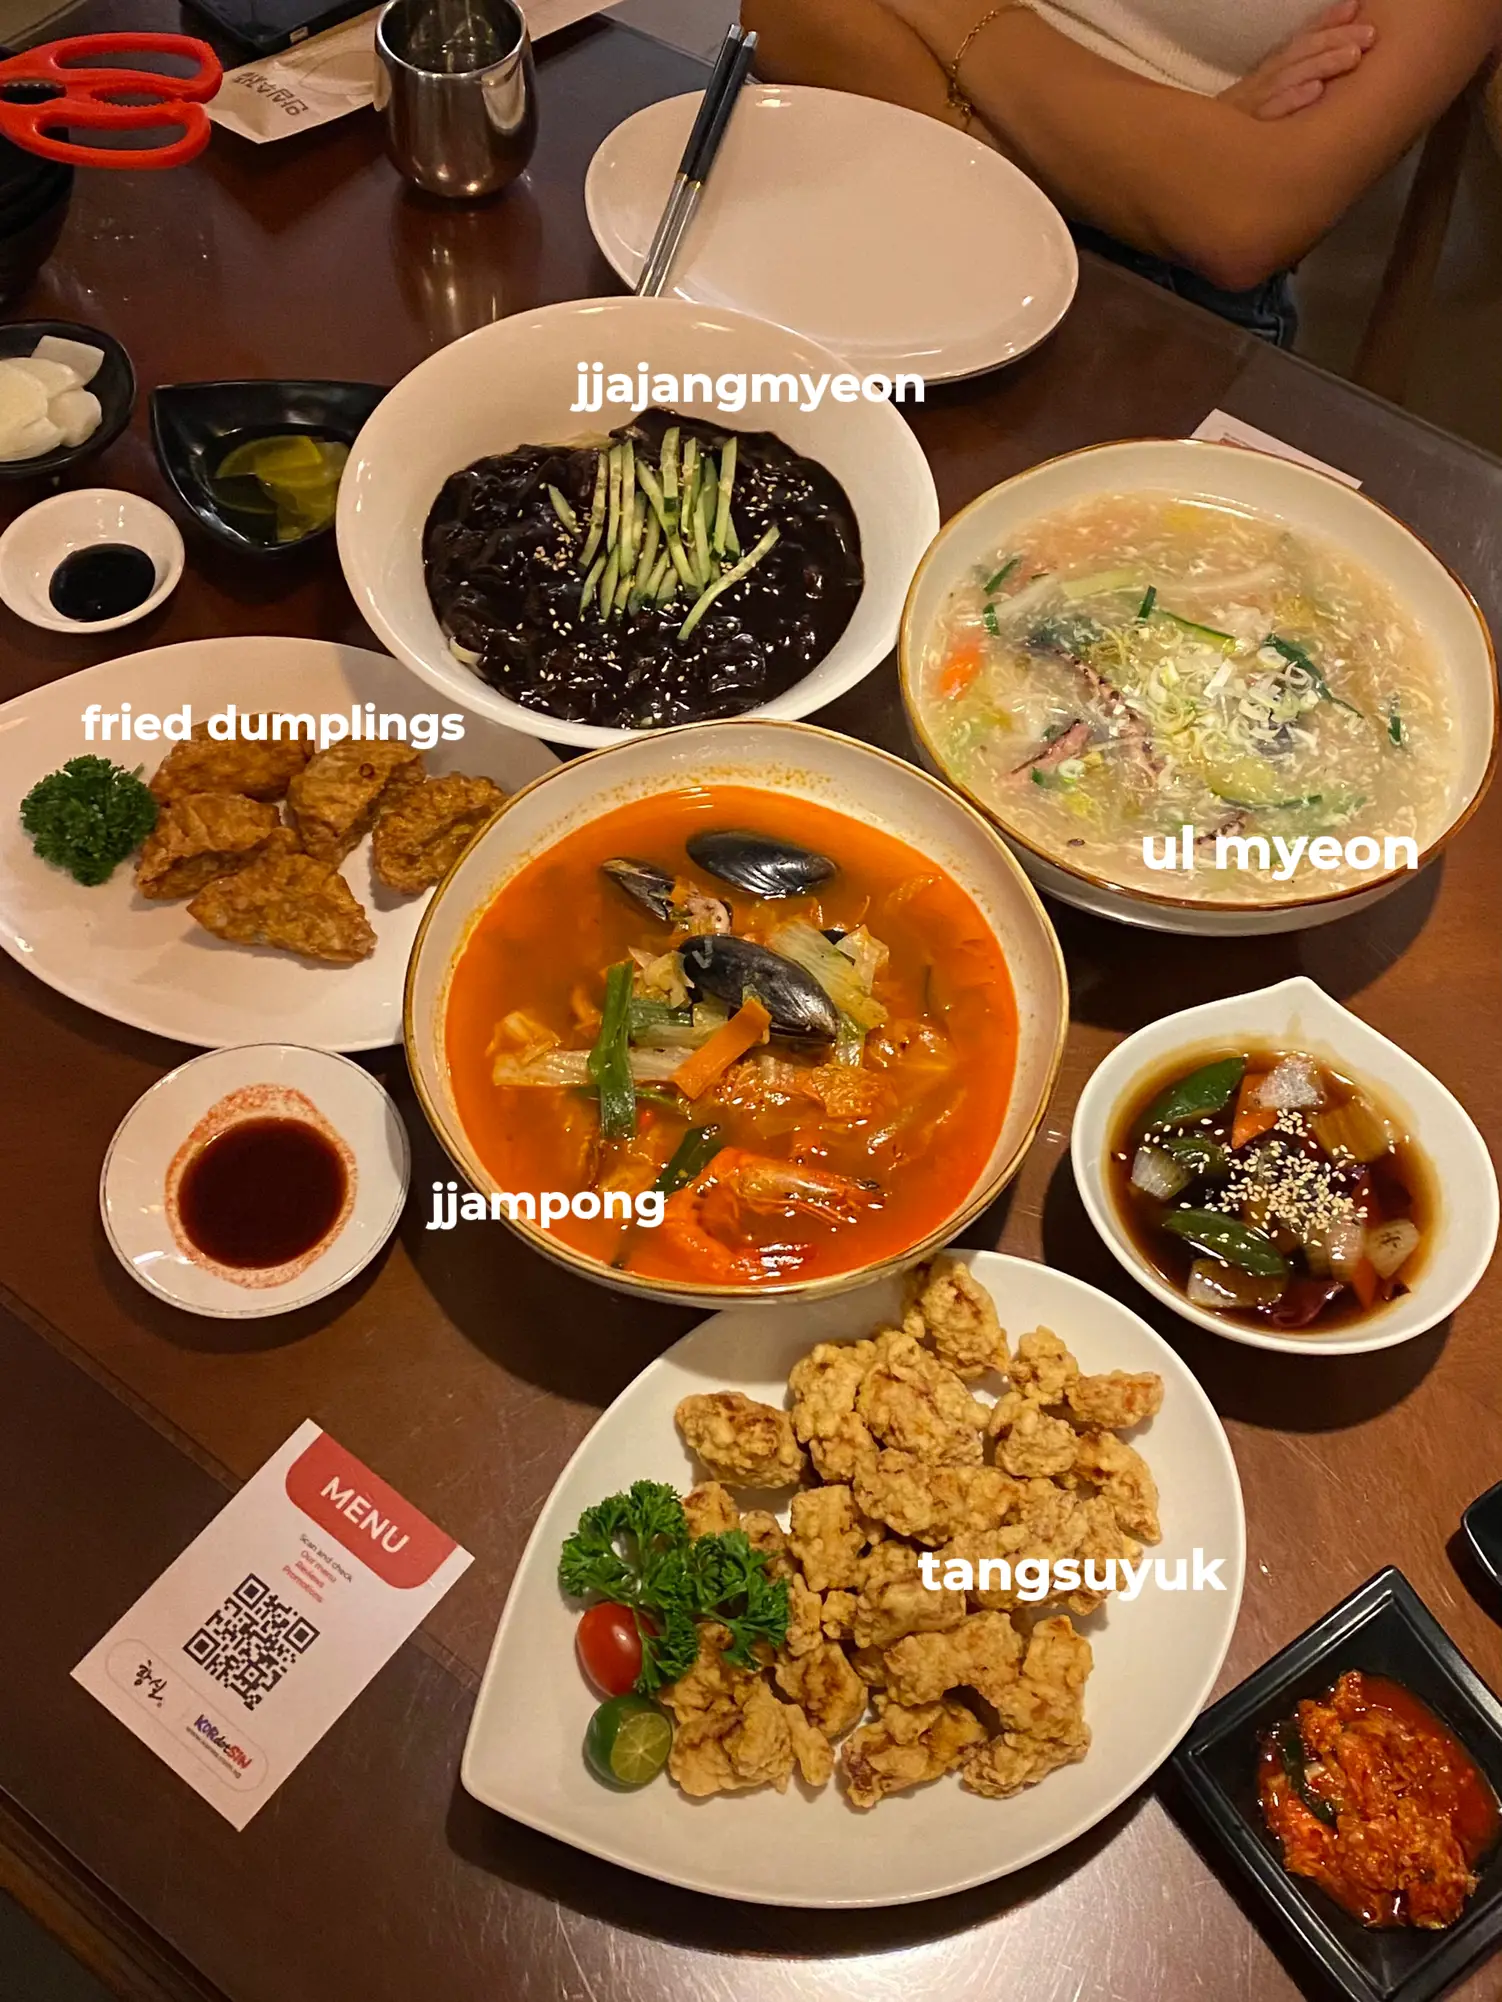 IMO hands down the most legit korean food in sg's images(1)